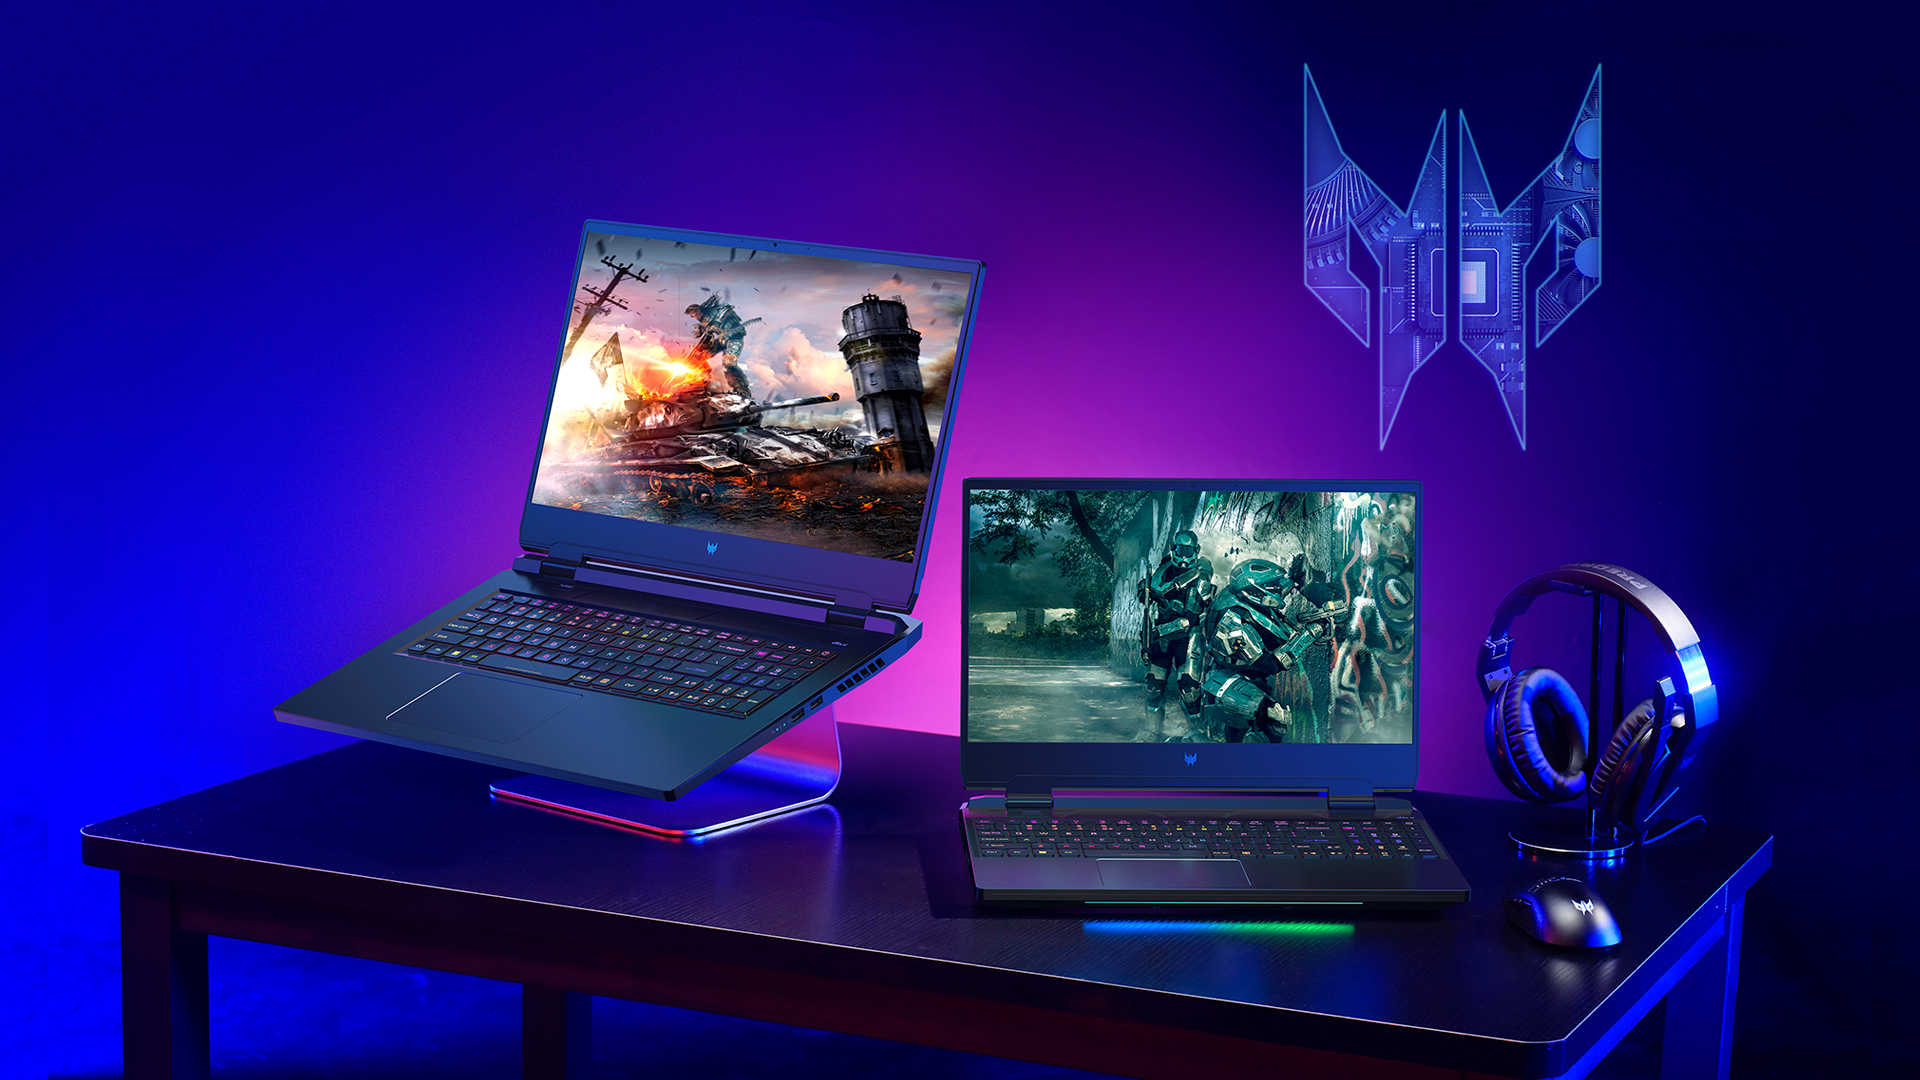 Game Without Compromise with the Predator Helios 300 - Intel